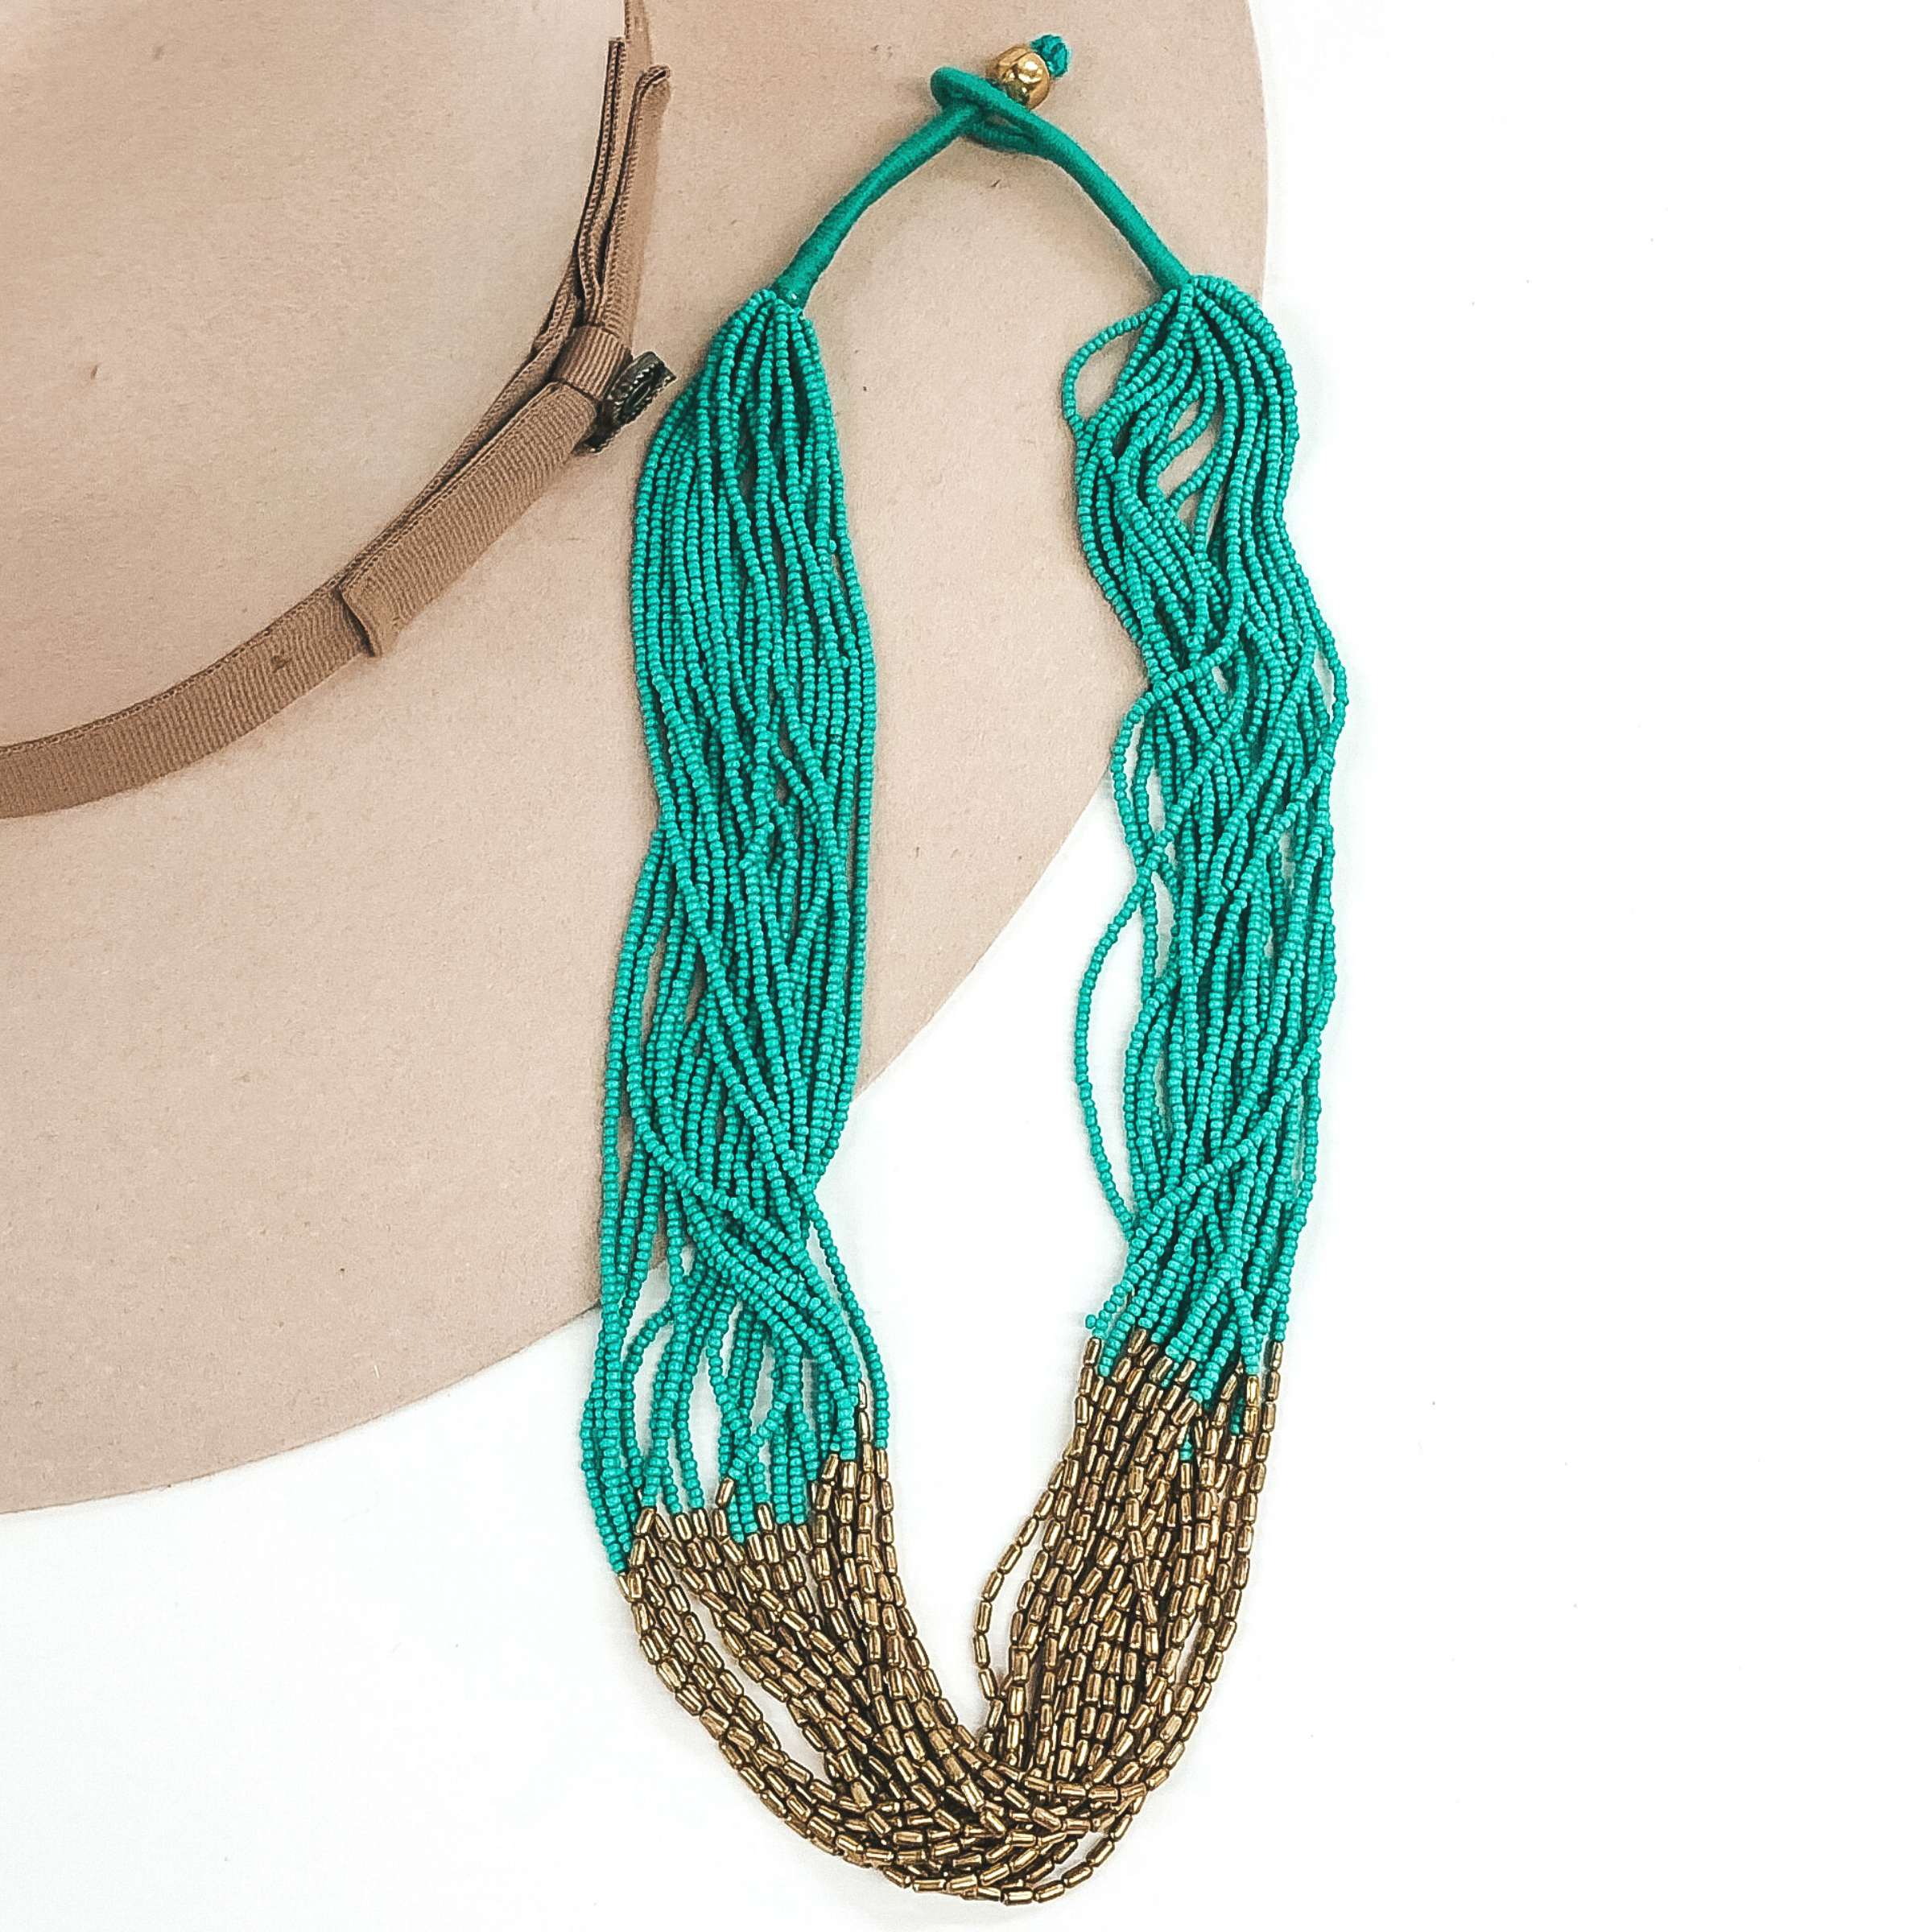 The strands on this necklace have turquoise beads and gold beads in the middle of the string. There are a lot of single strings put together to make a single necklace. The necklace has a gold bead that goes through a loop to put the necklace on. This necklace is pictured laying on a beige hat on a white background.